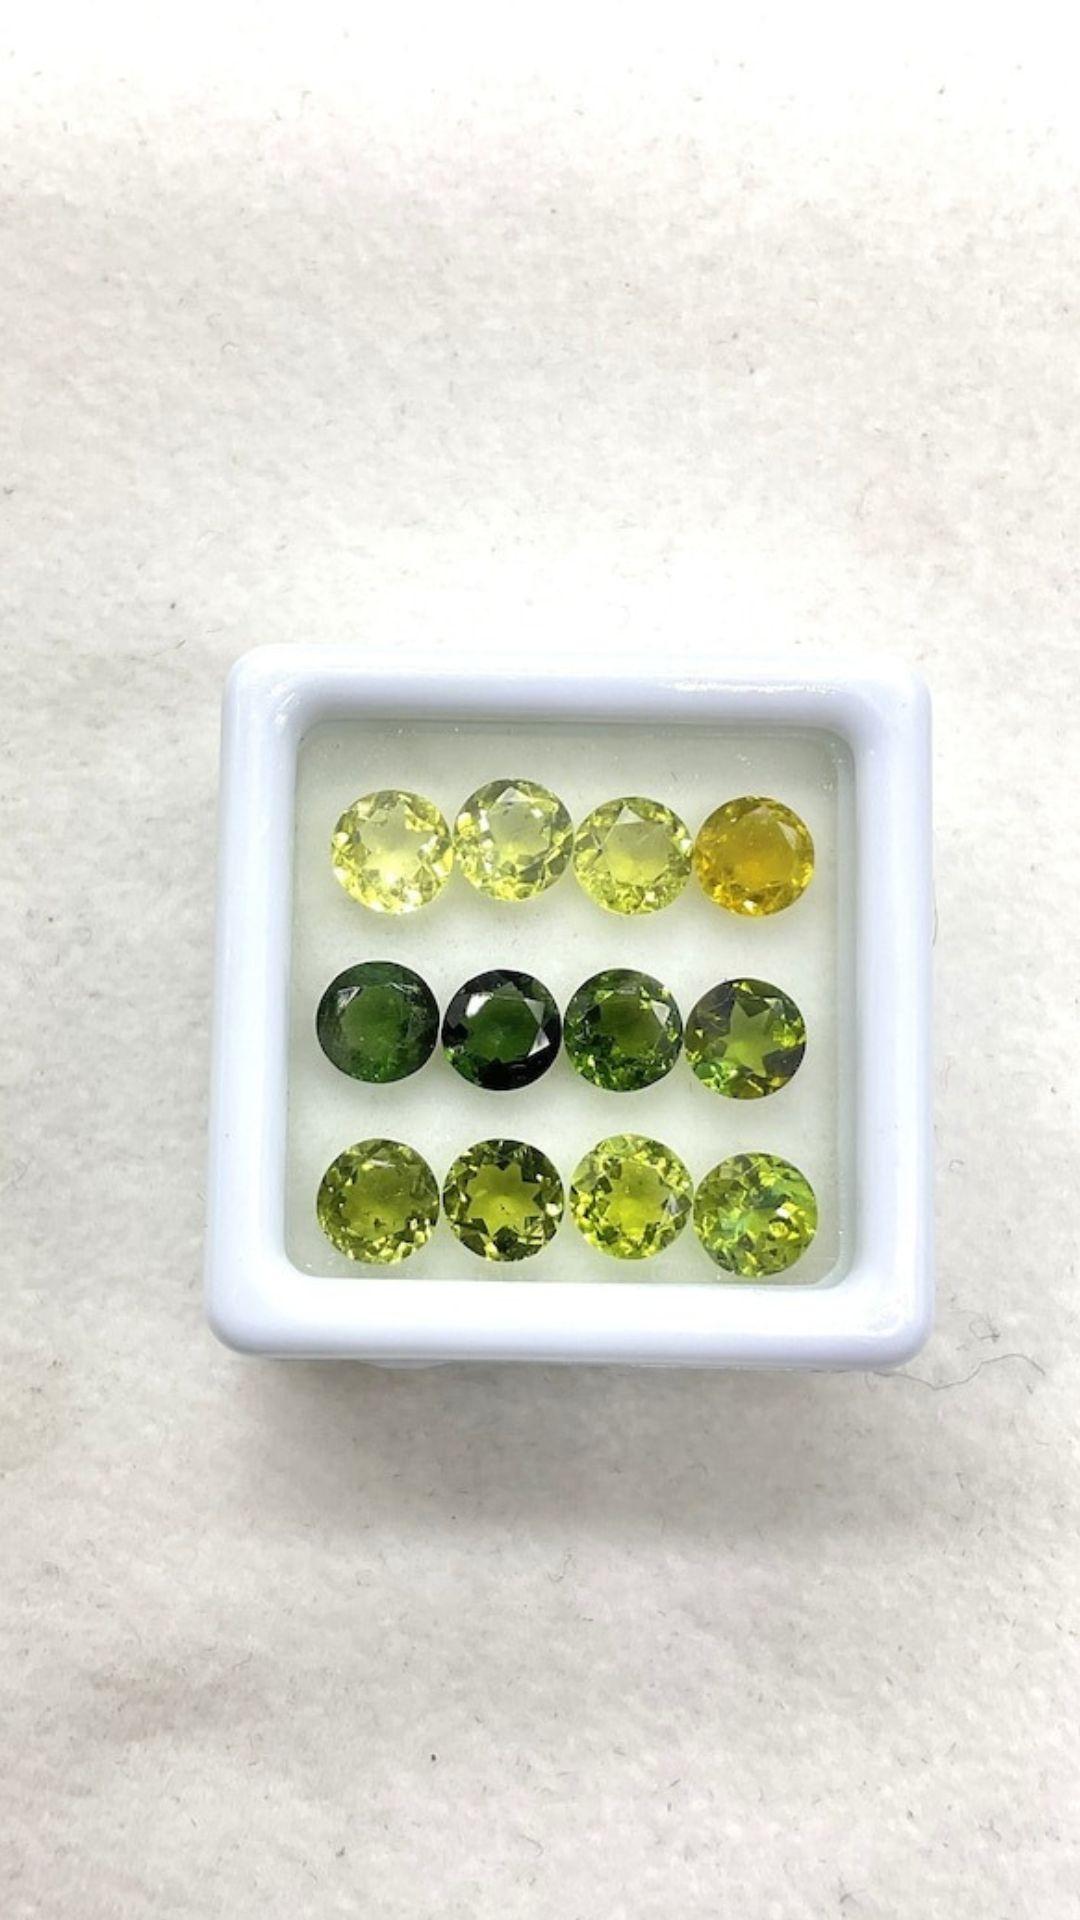 Gemstone - Tourmaline
Weight- 6.65 Carats
Shape - Round
Size - 5 MM
Pieces - 12
Drill- Not Drilled